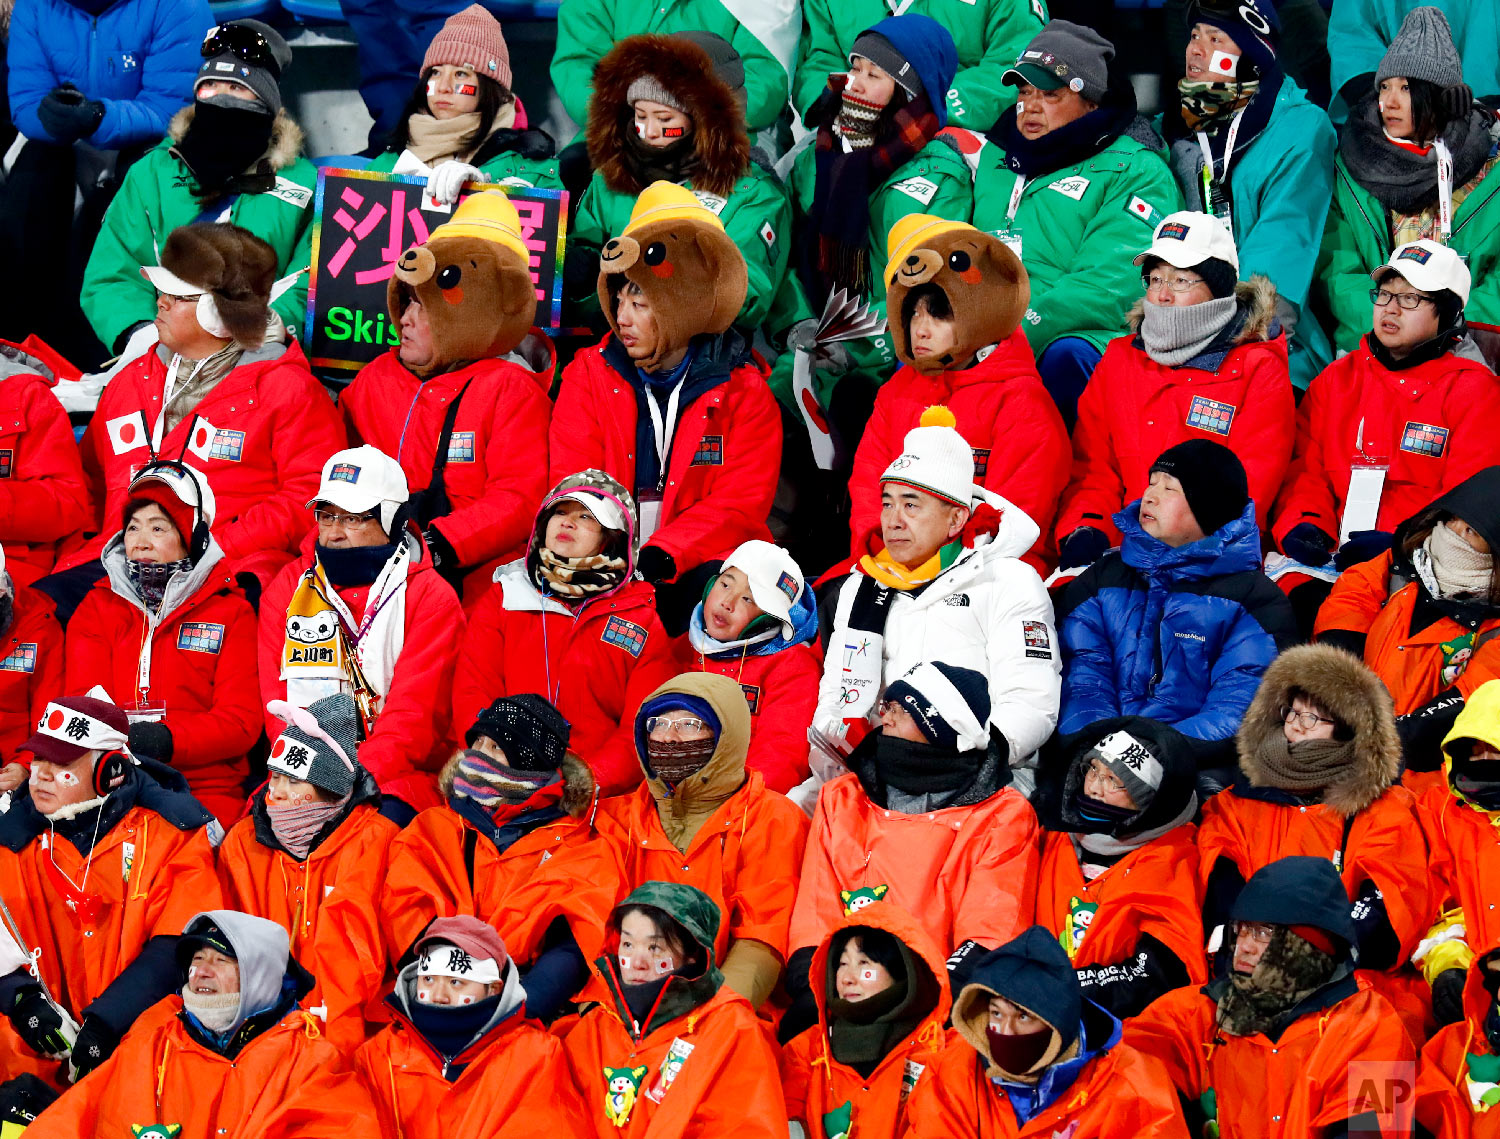  Fans watch during the women's normal hill individual ski jumping competition at the 2018 Winter Olympics in Pyeongchang, South Korea, Monday, Feb. 12, 2018. (AP Photo/Matthias Schrader) 